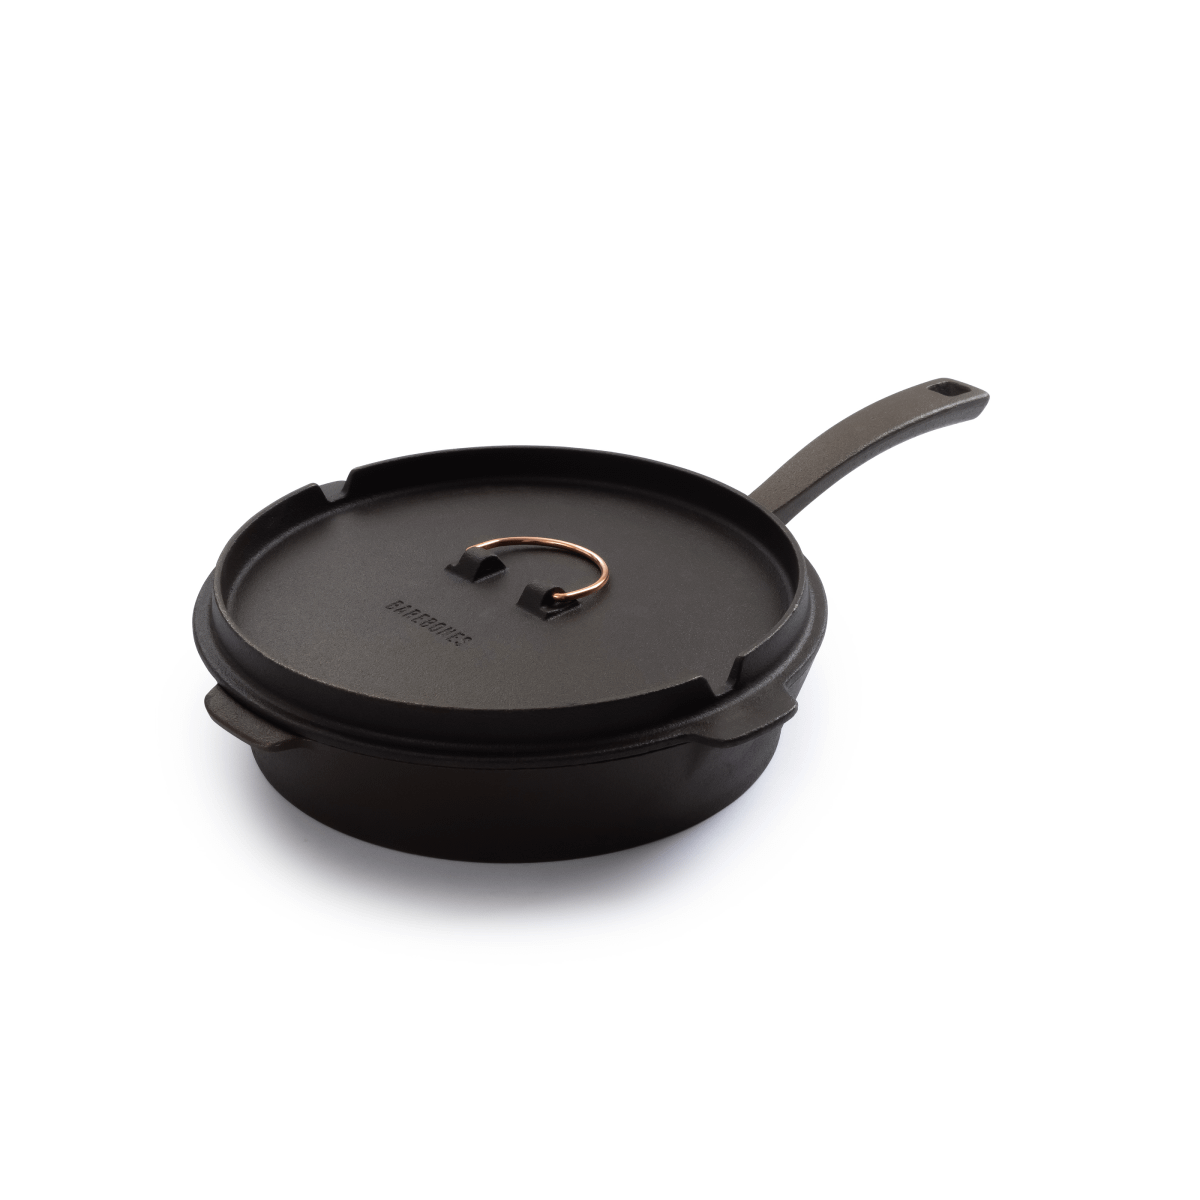 All-in-one Cast Iron Skillet - 25cm - kopen? |